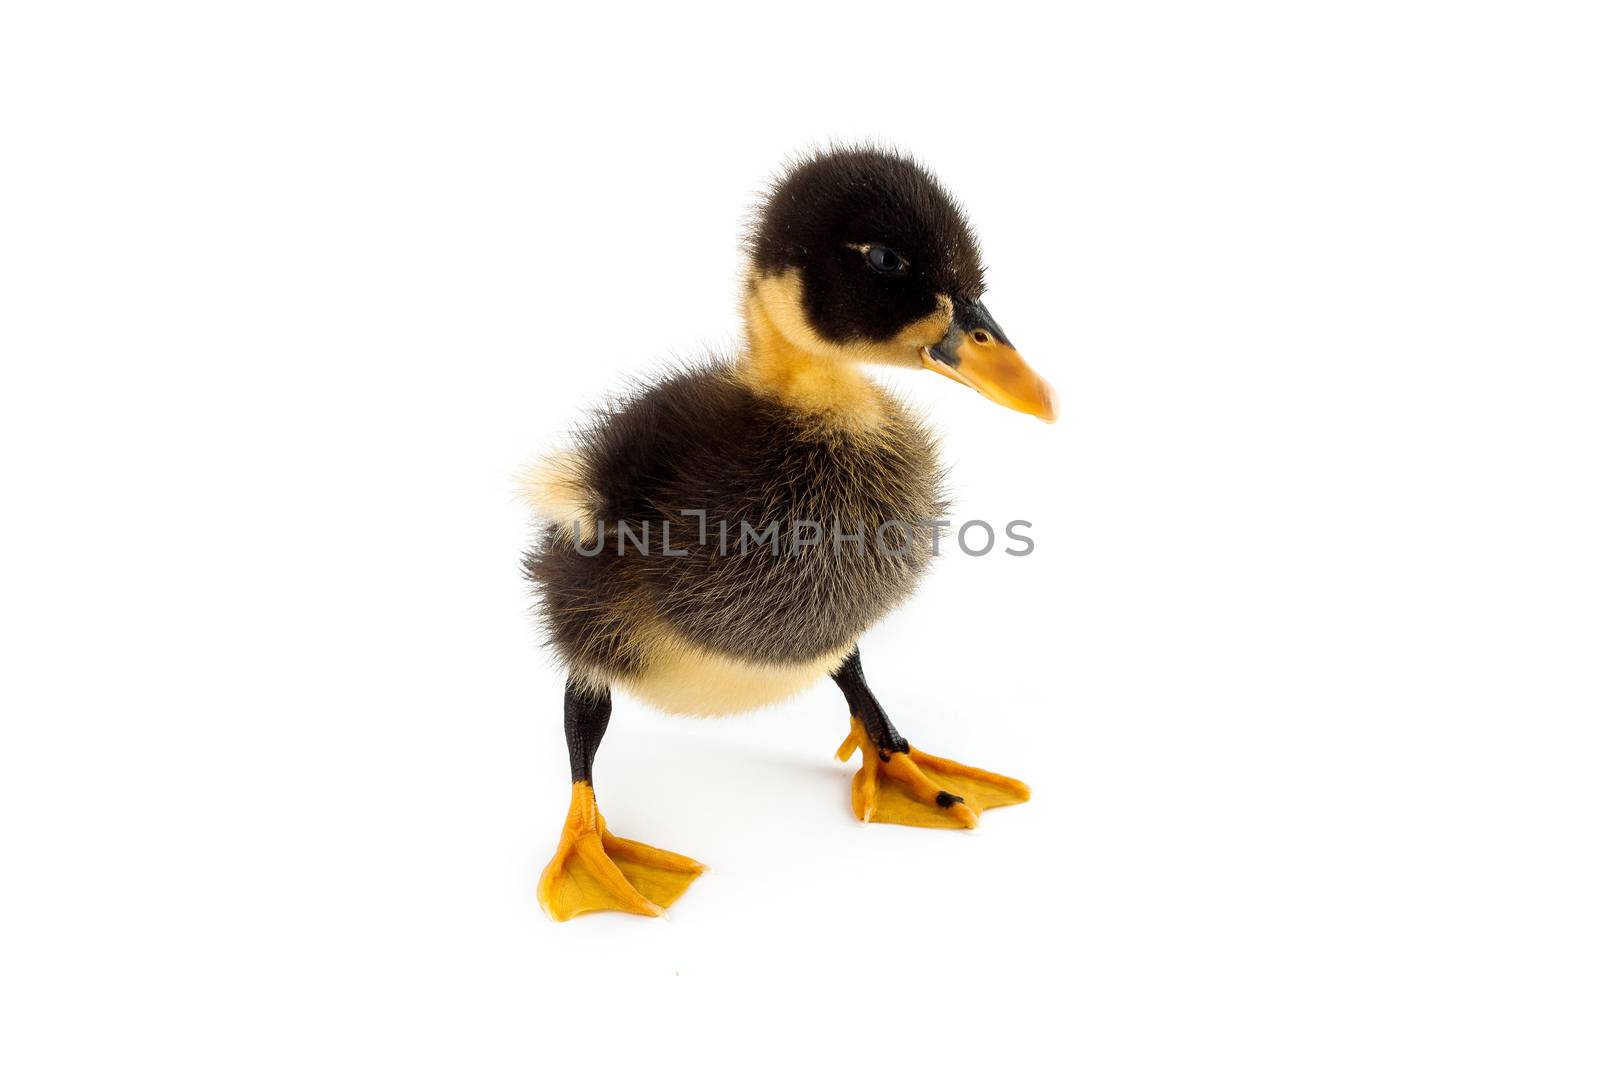 The small black duckling isolated on a white background